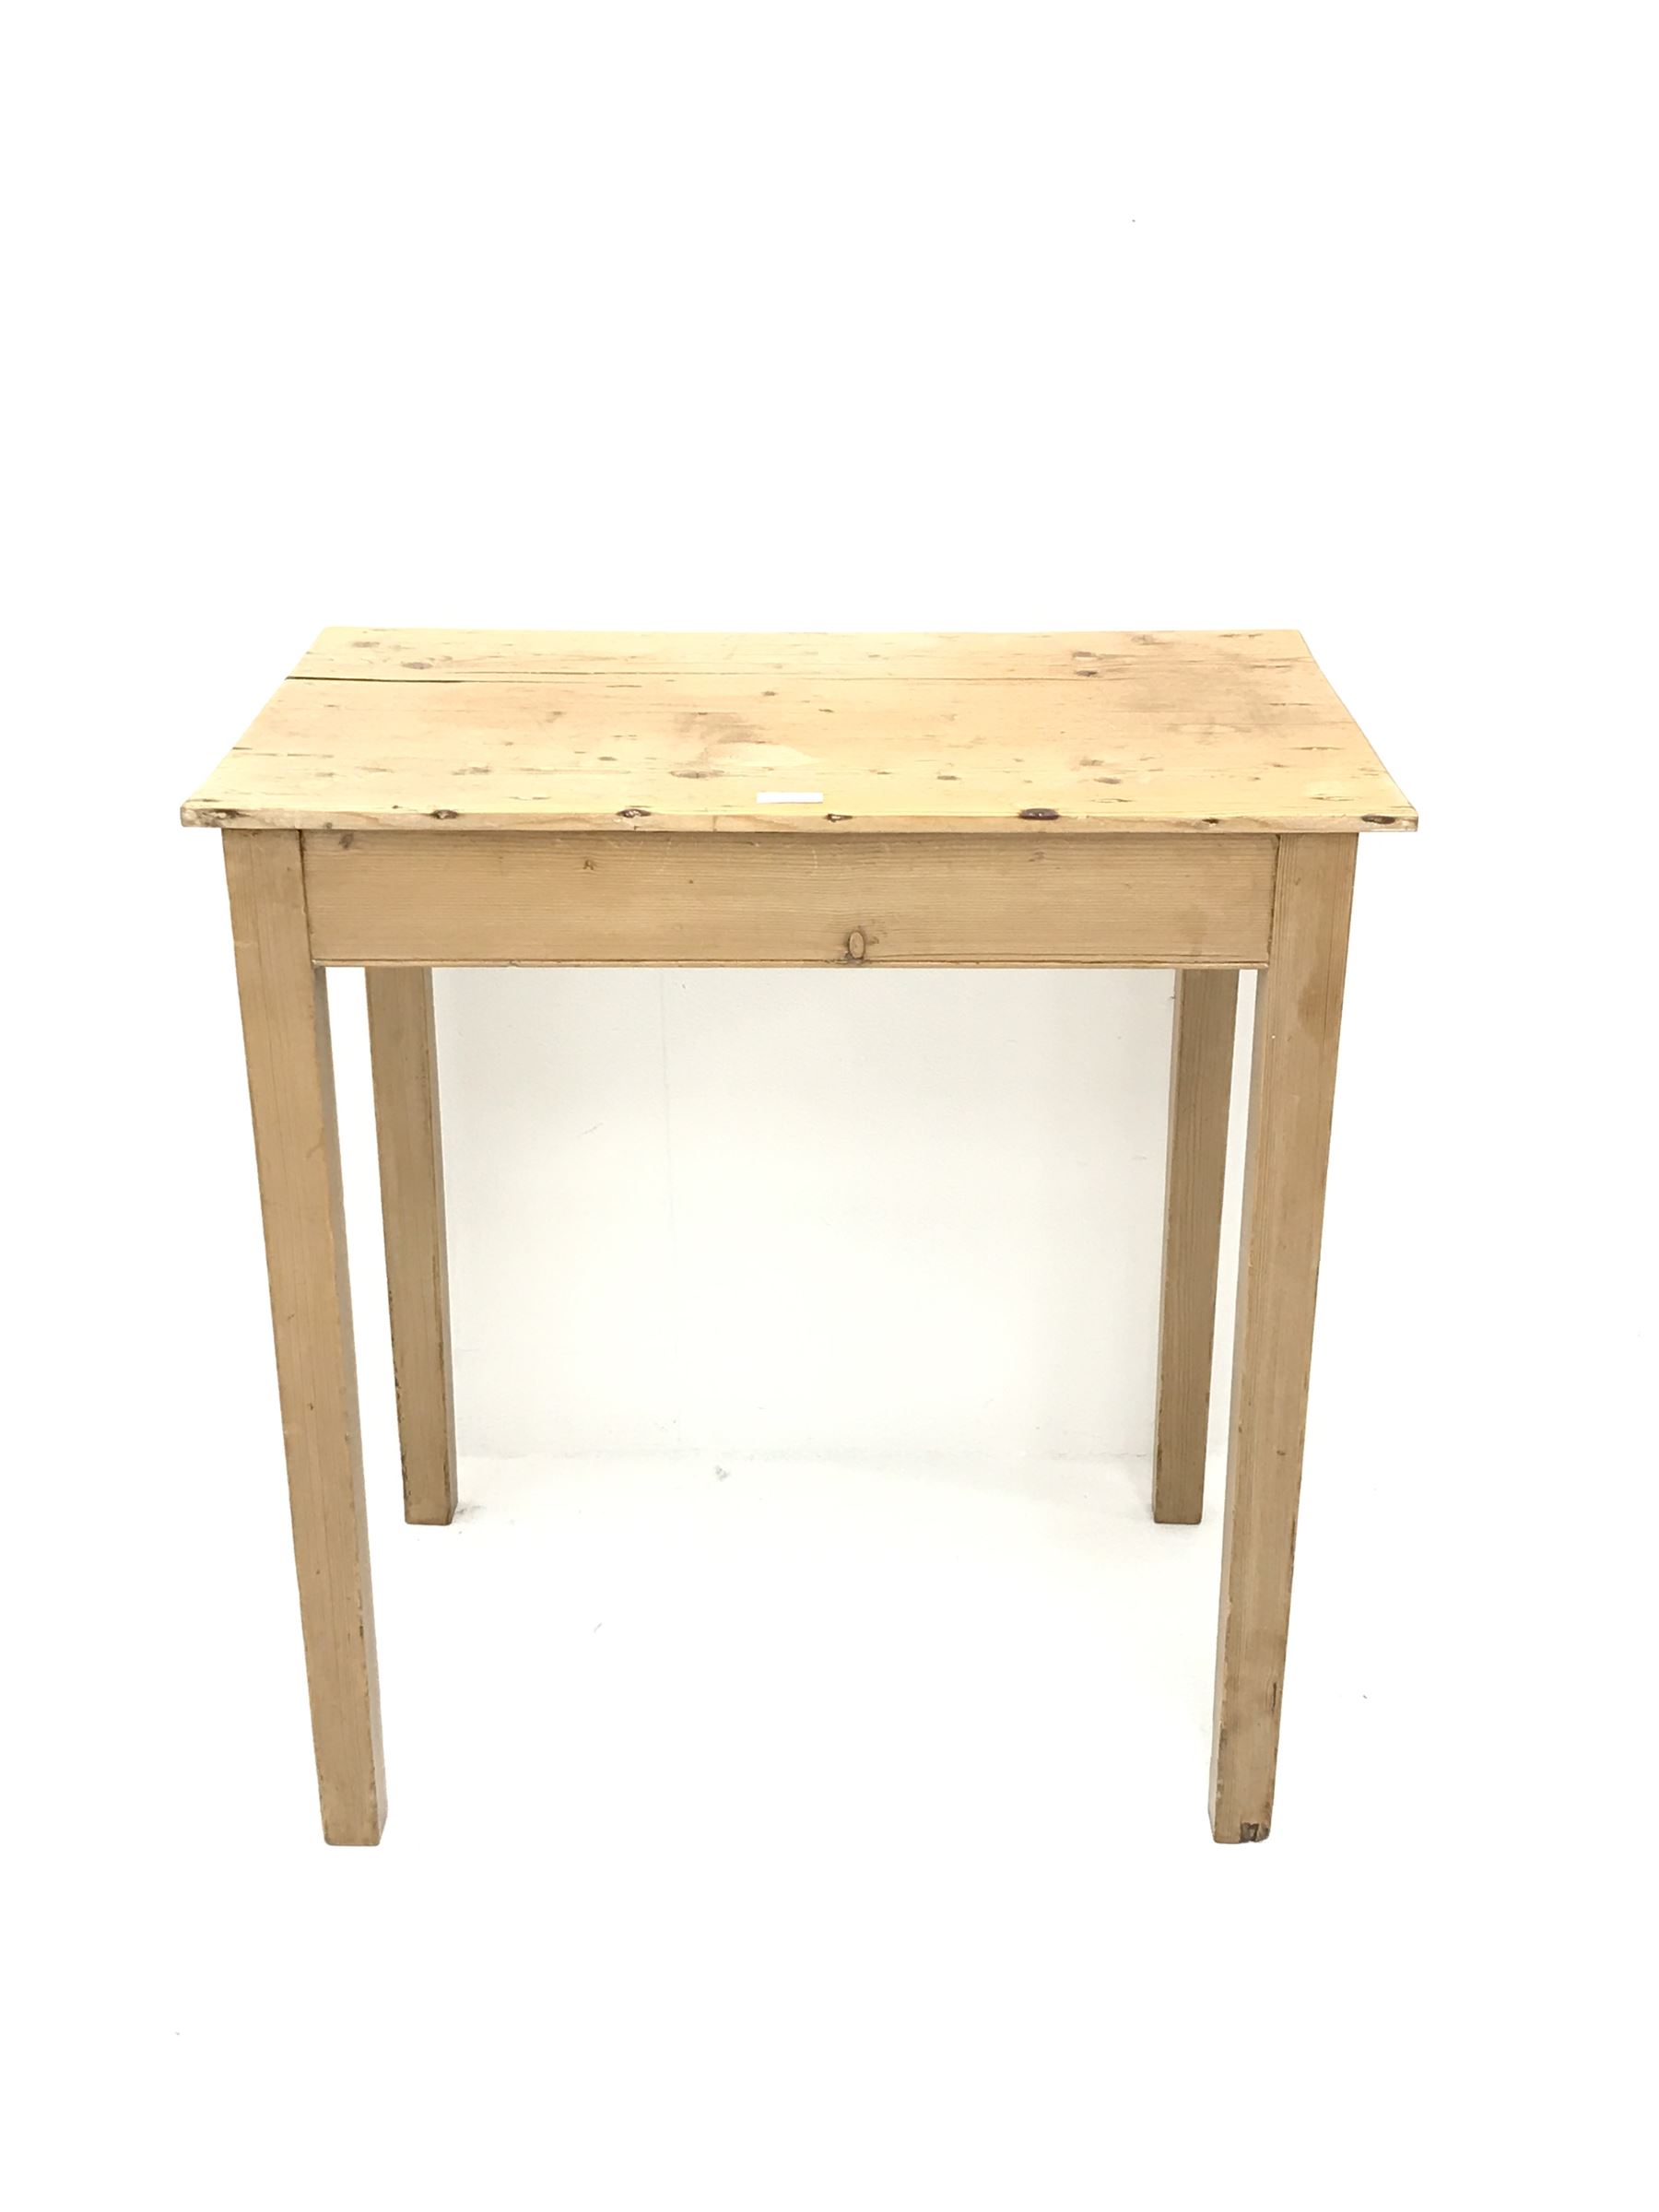 Small pine side table - Image 2 of 2